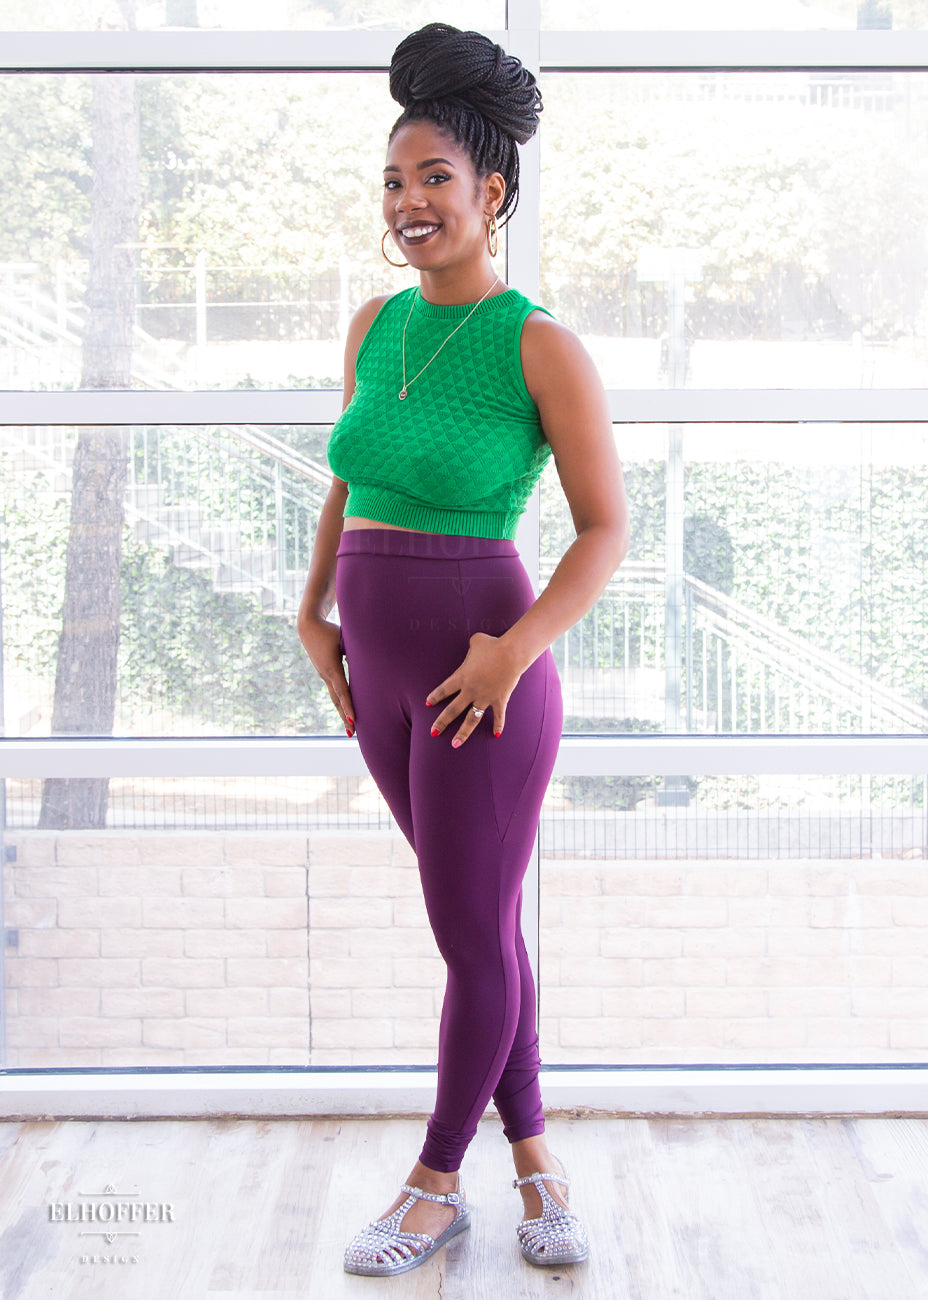 Krystina, a size small medium dark skinned model with long braids, is wearing a pair of high waisted leggings with a seamless front and side seam pockets in plum.